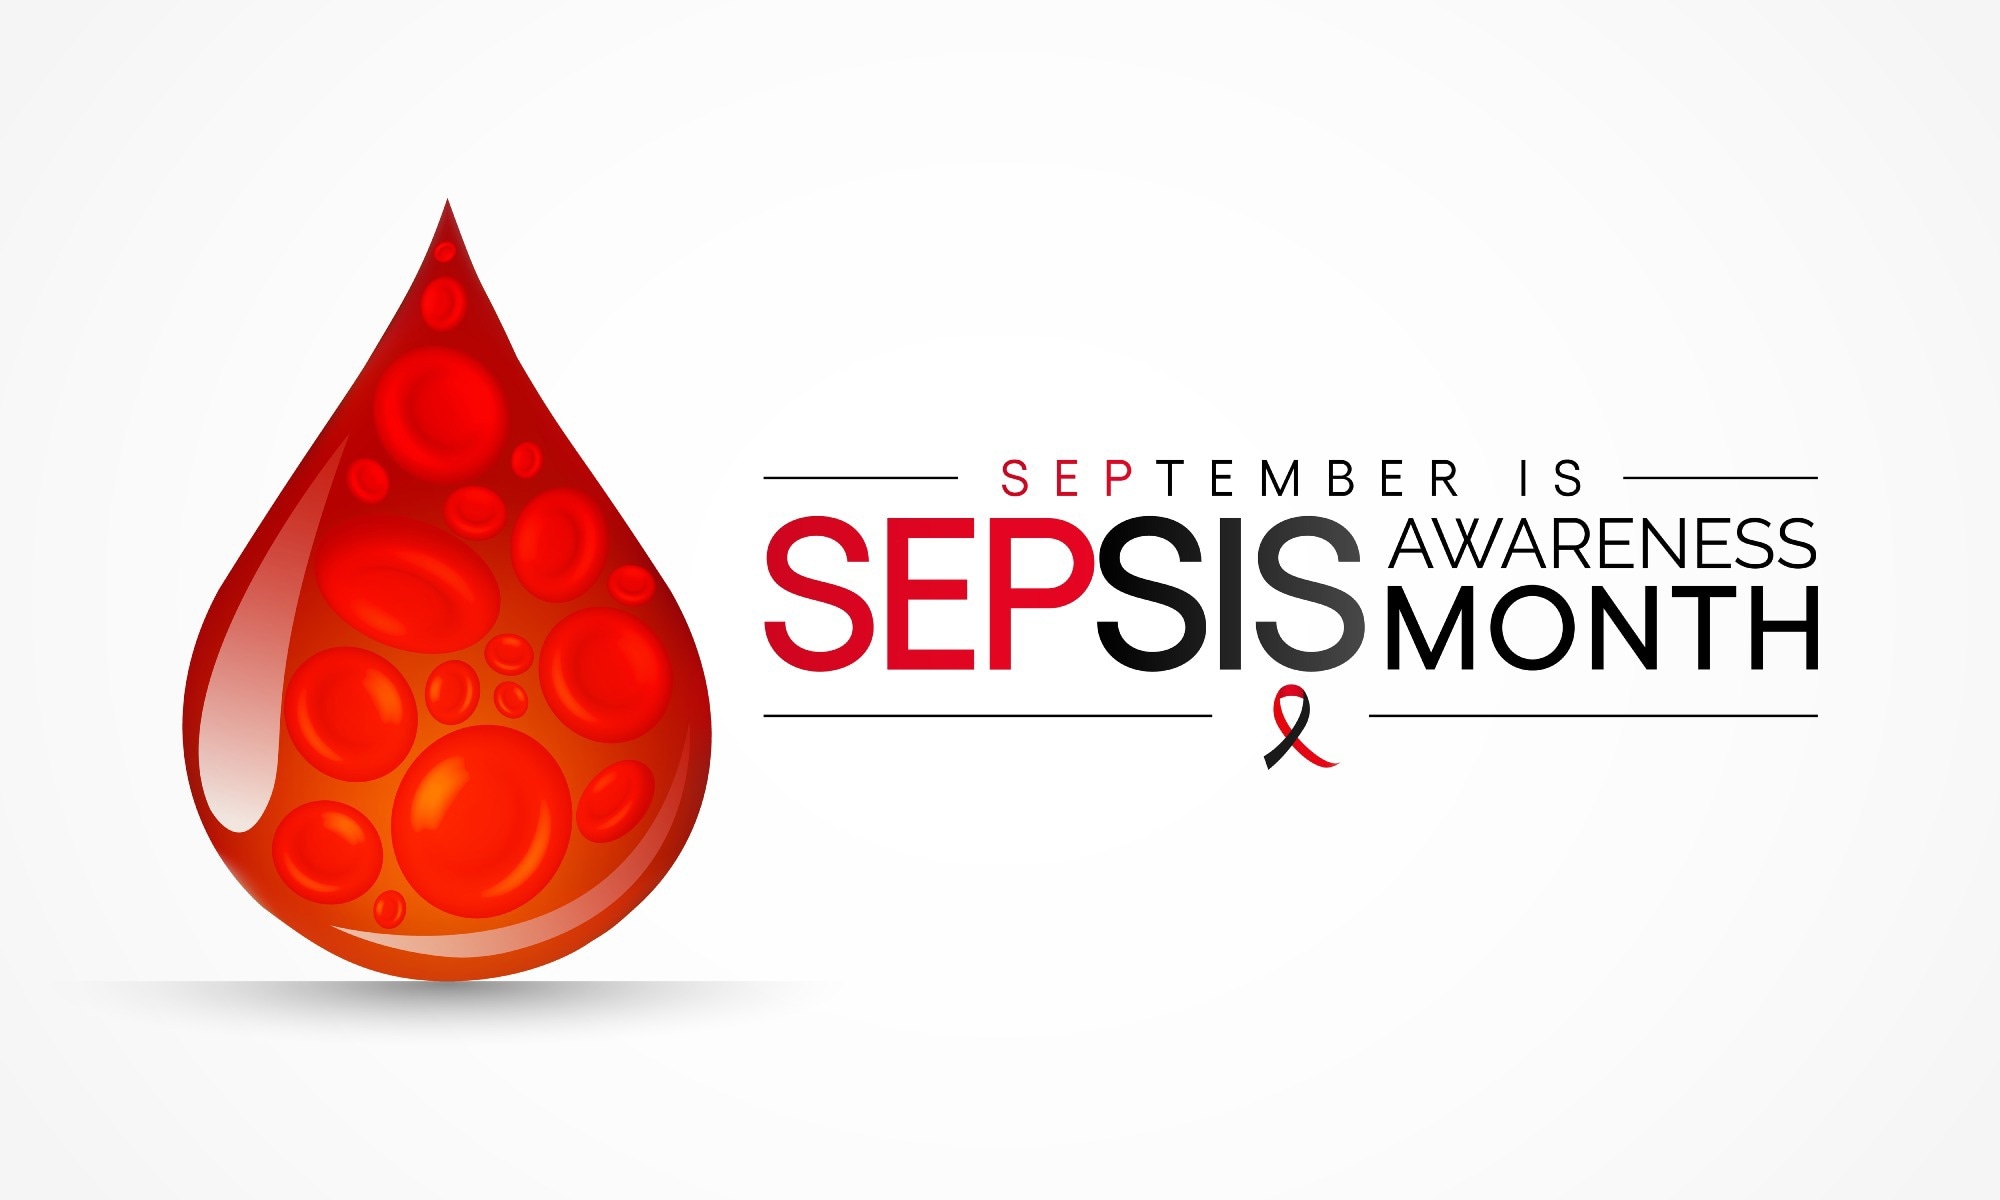 World Sepsis Month: Increasing Sepsis Awareness Patient Support and Improving Survivor Outcomes – News-Medical.Net